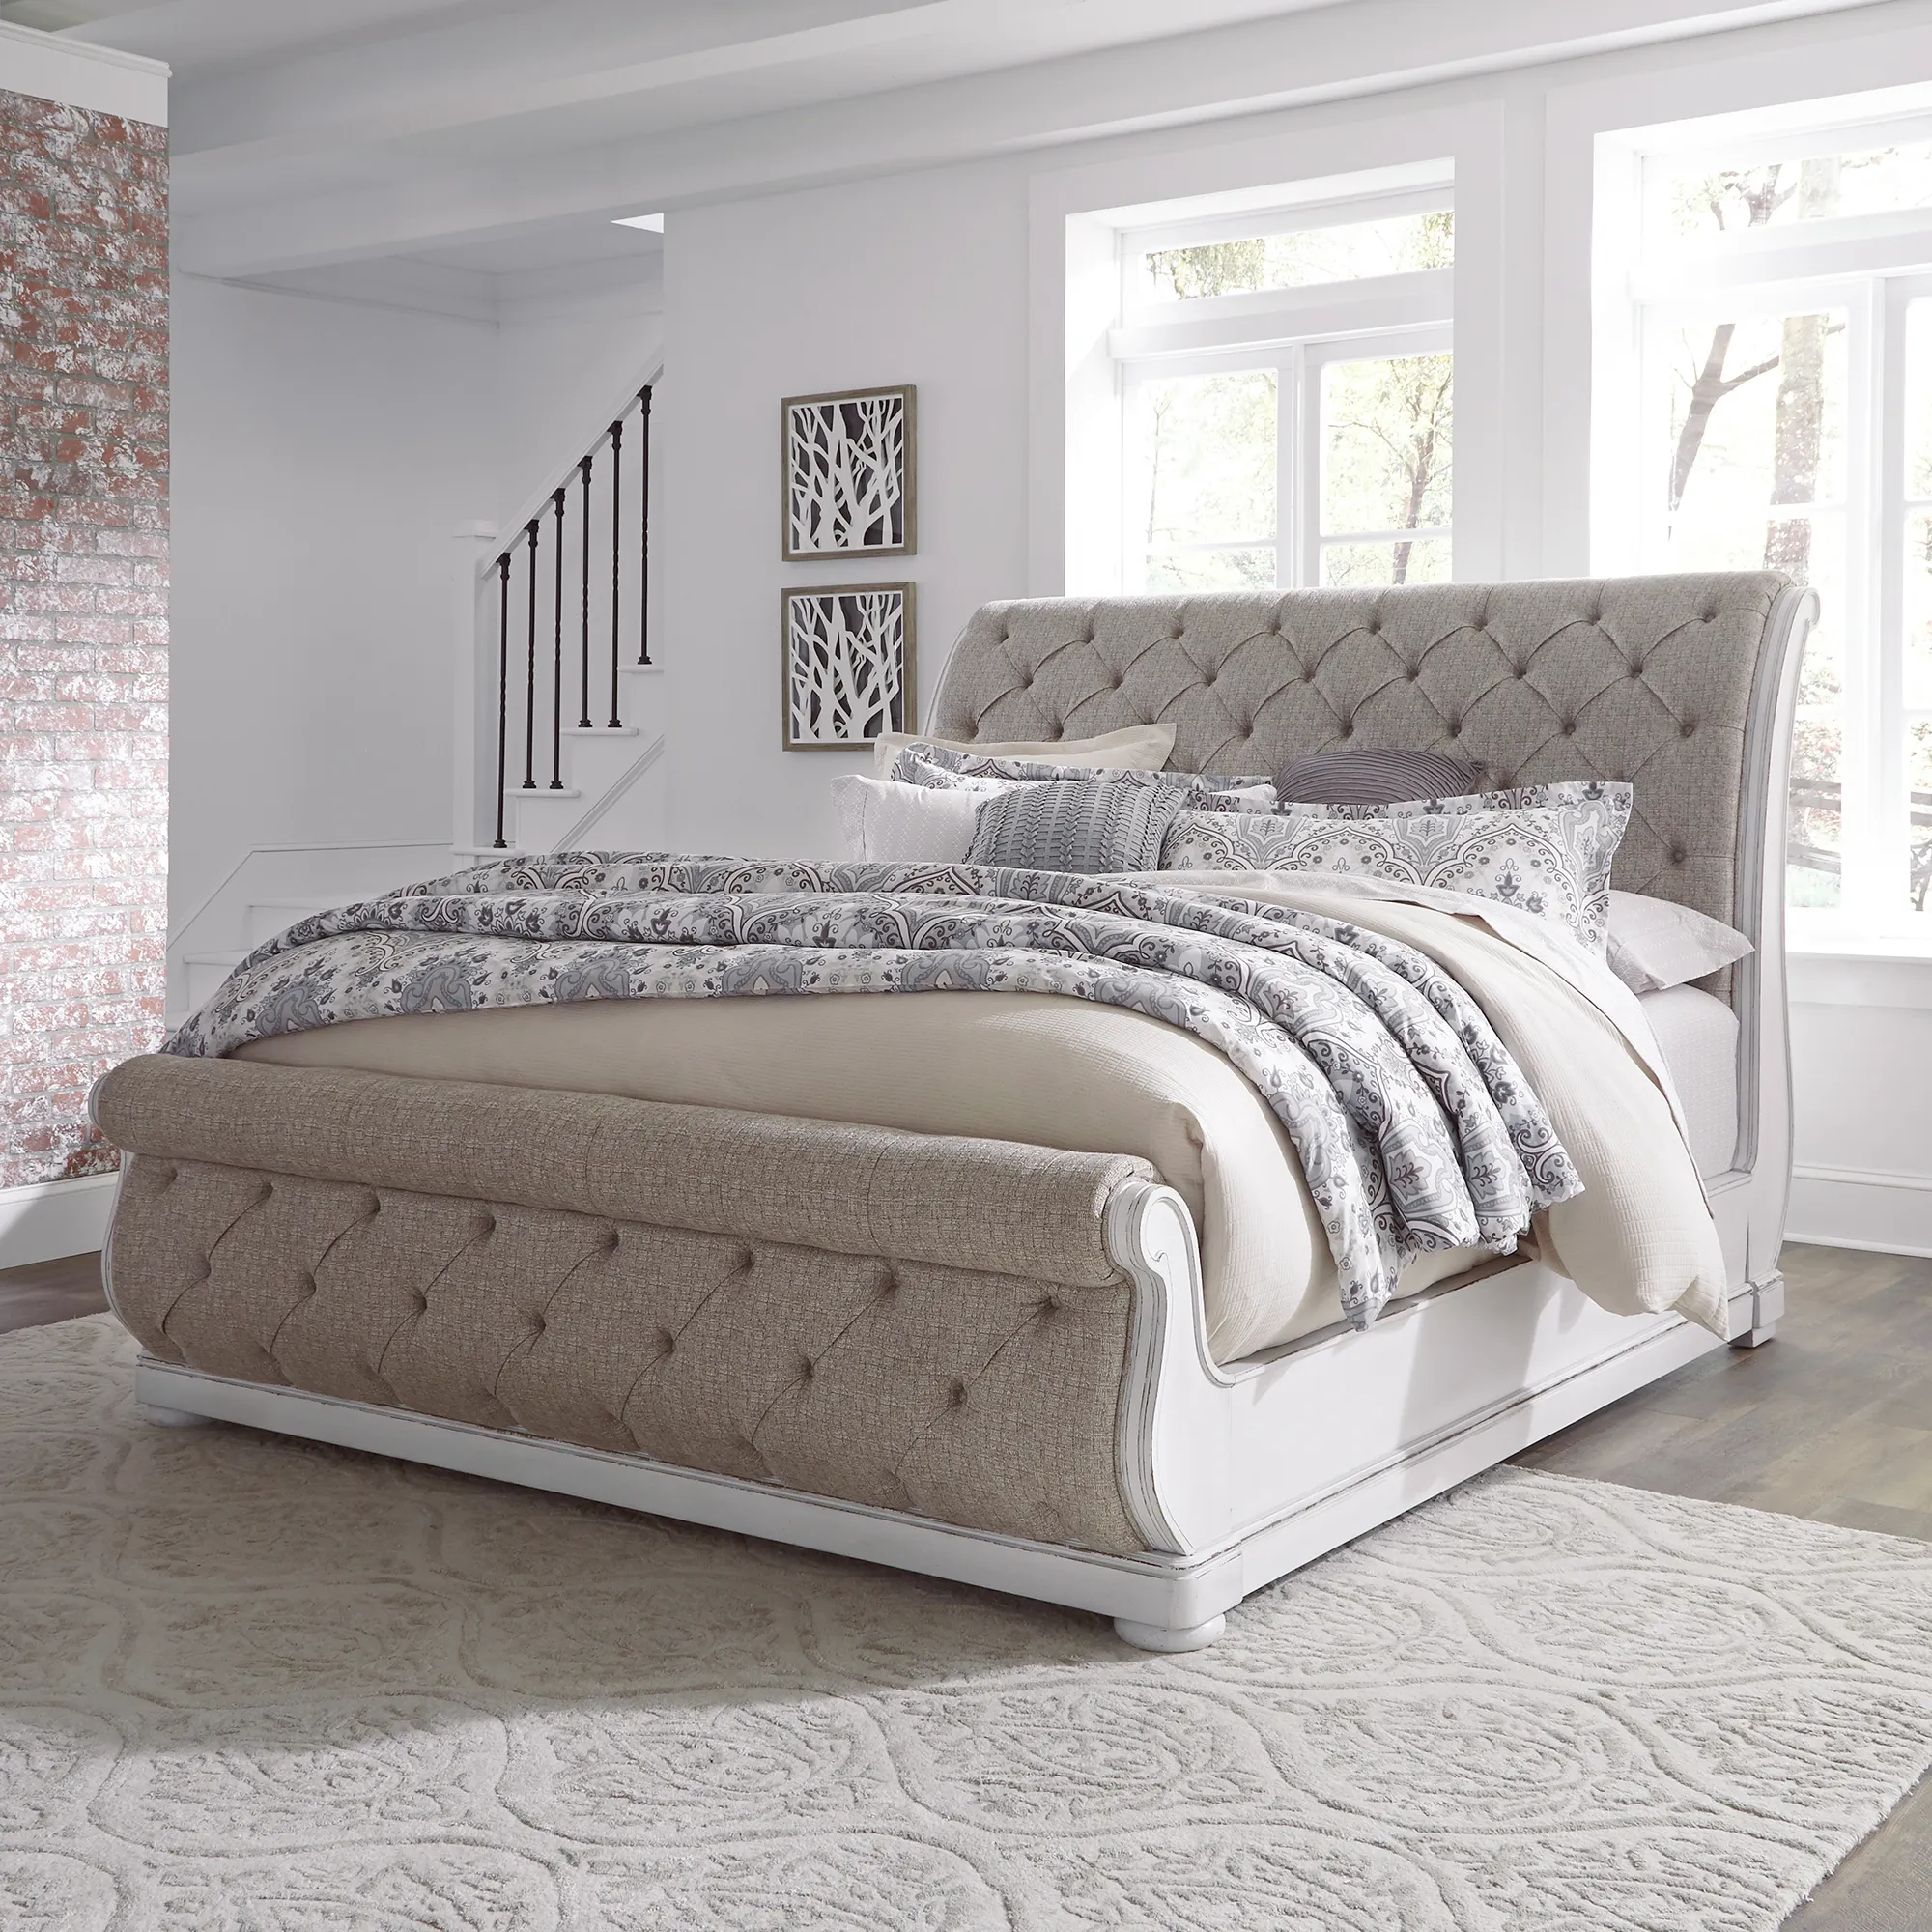 KING CALIFORNIA UPHOLSTERED SLEIGH BED - MAGNOLIA MANOR